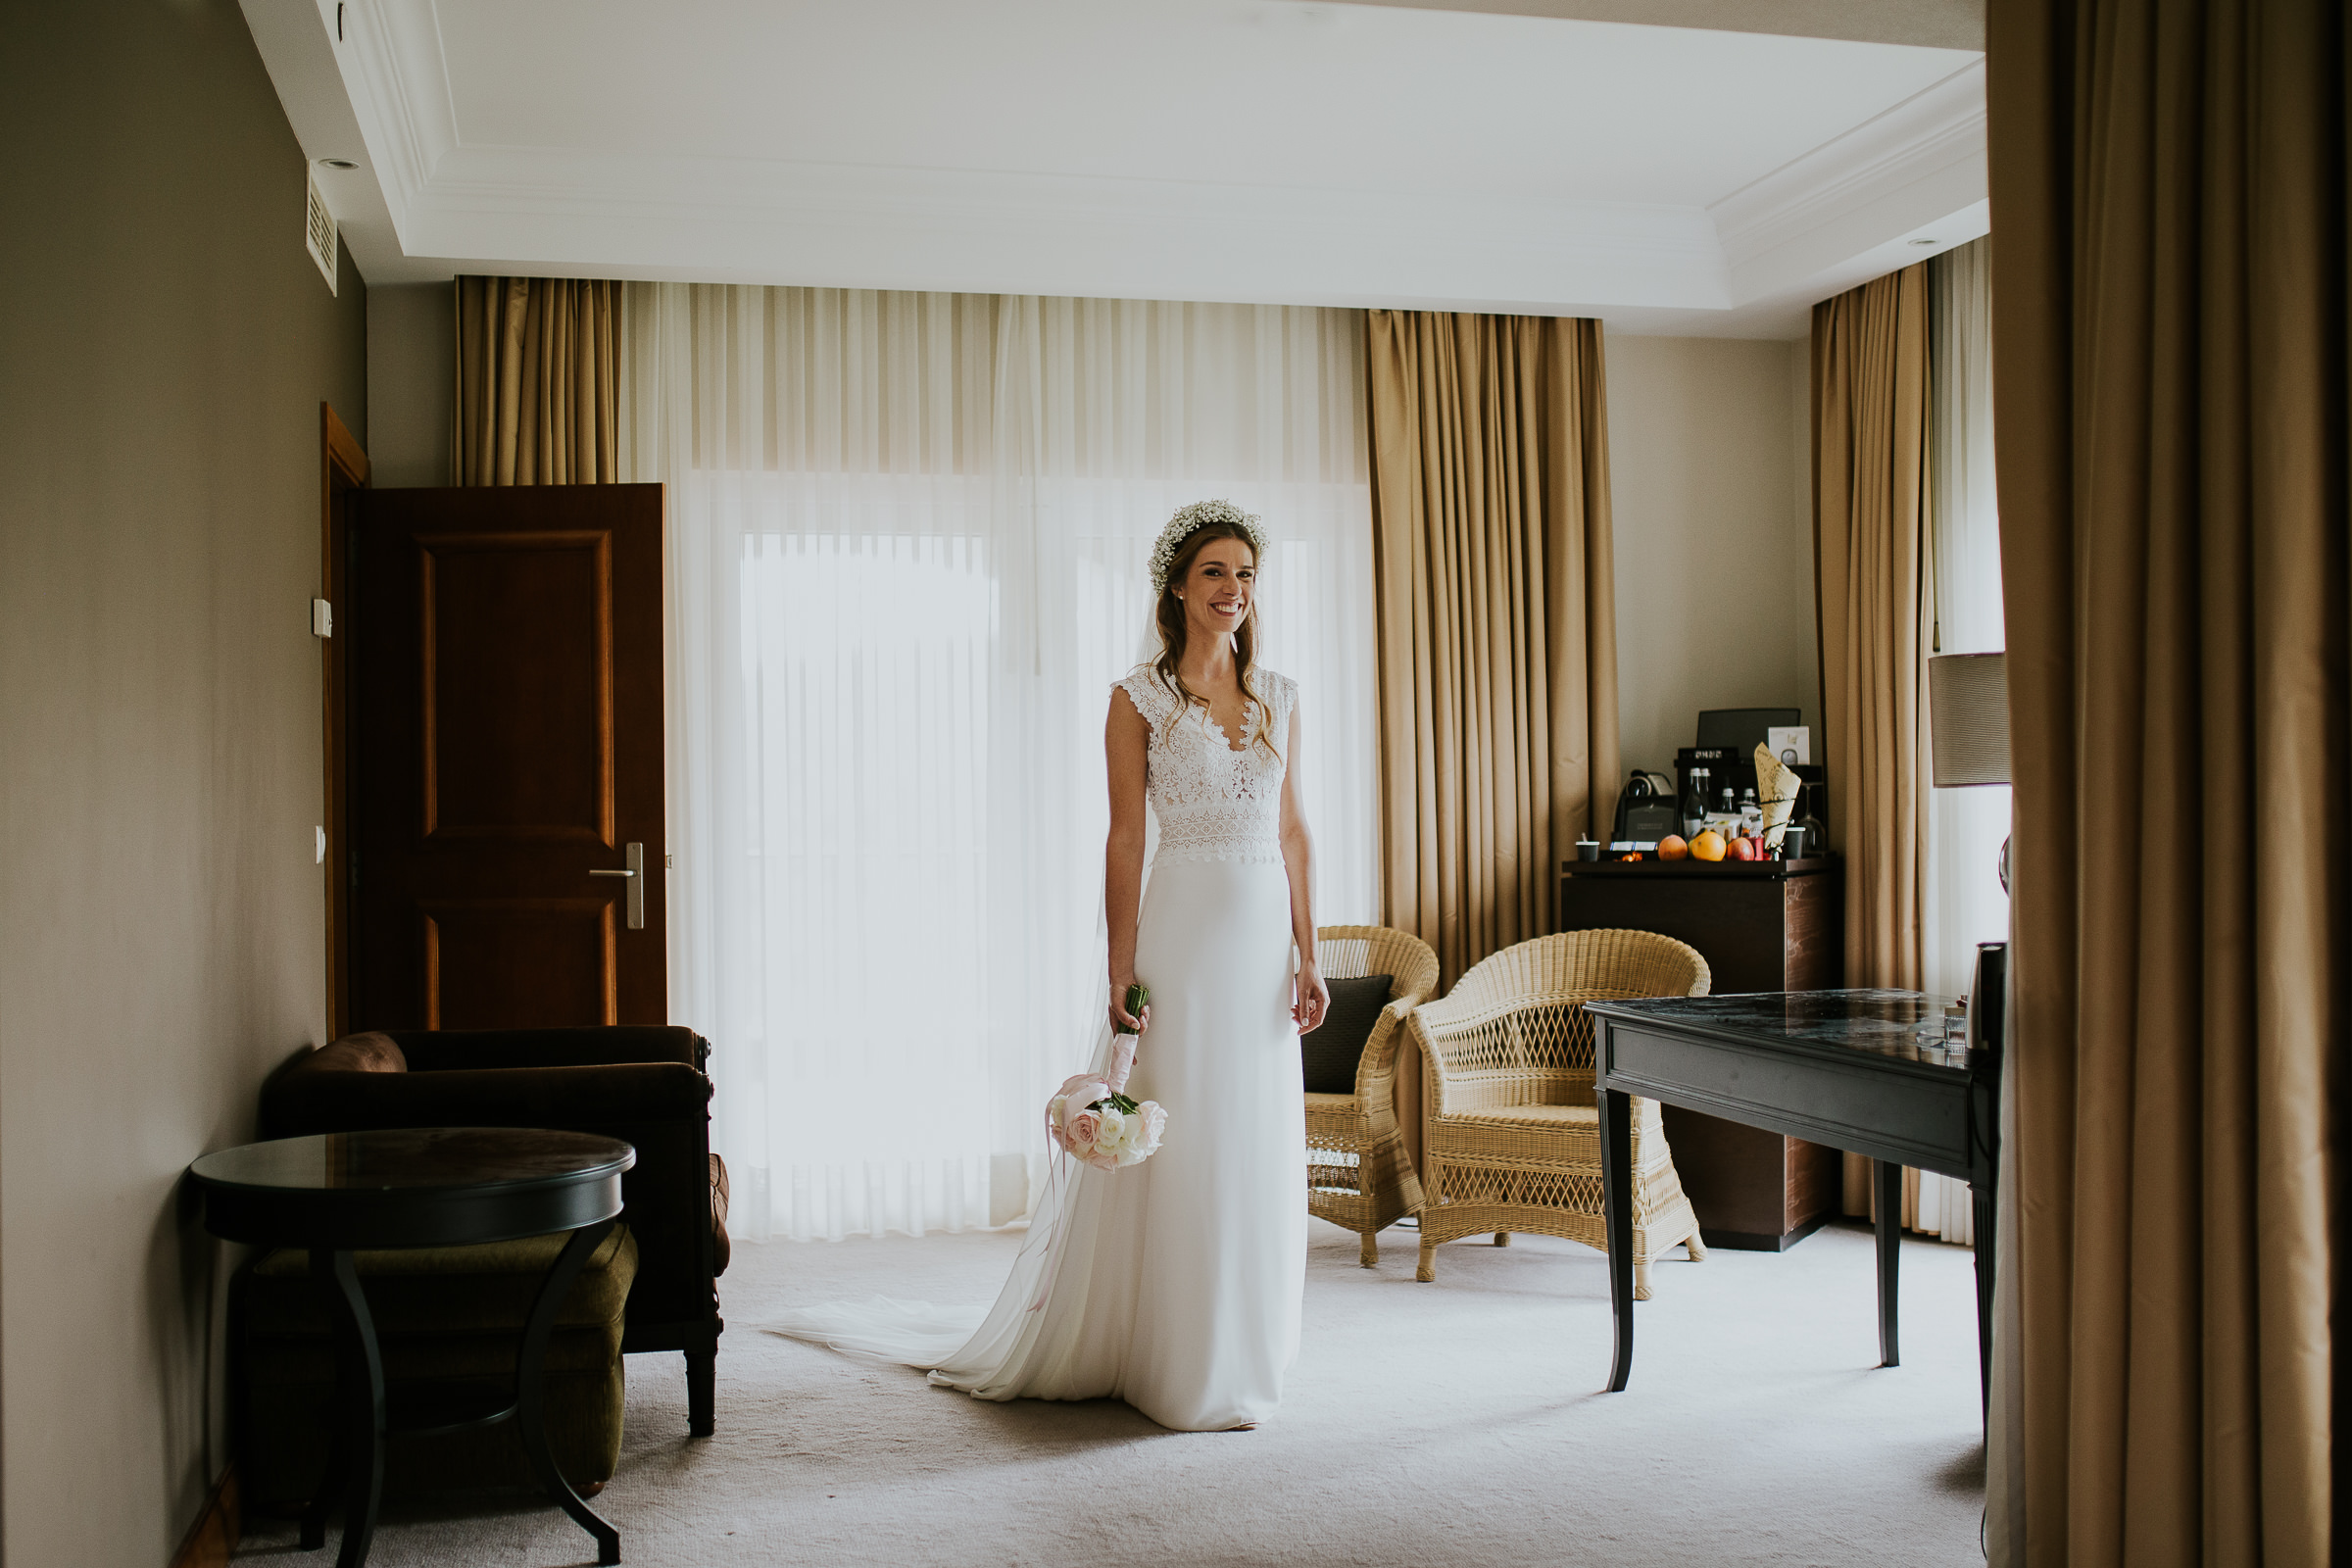 Centered portrait of the bride holing her bouquet in the middle of an hotel room